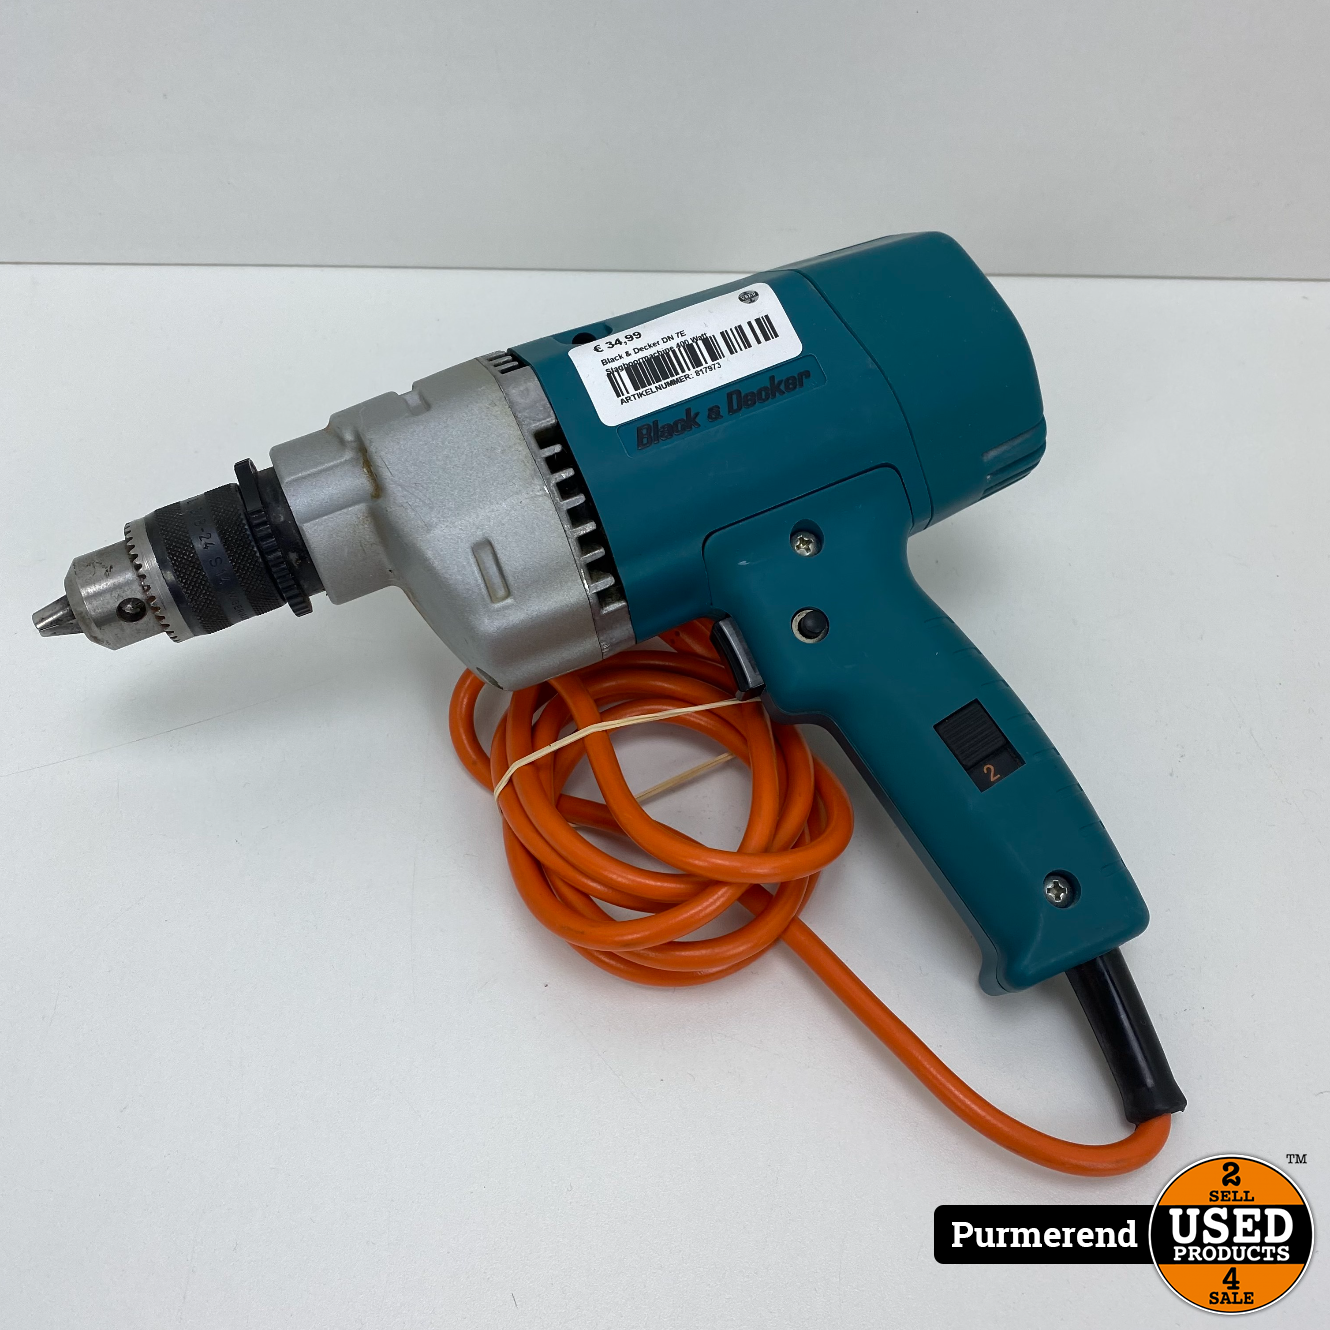 Black &amp; Decker DN 7E Slagboormachine 400 Watt - Used Products Purmerend